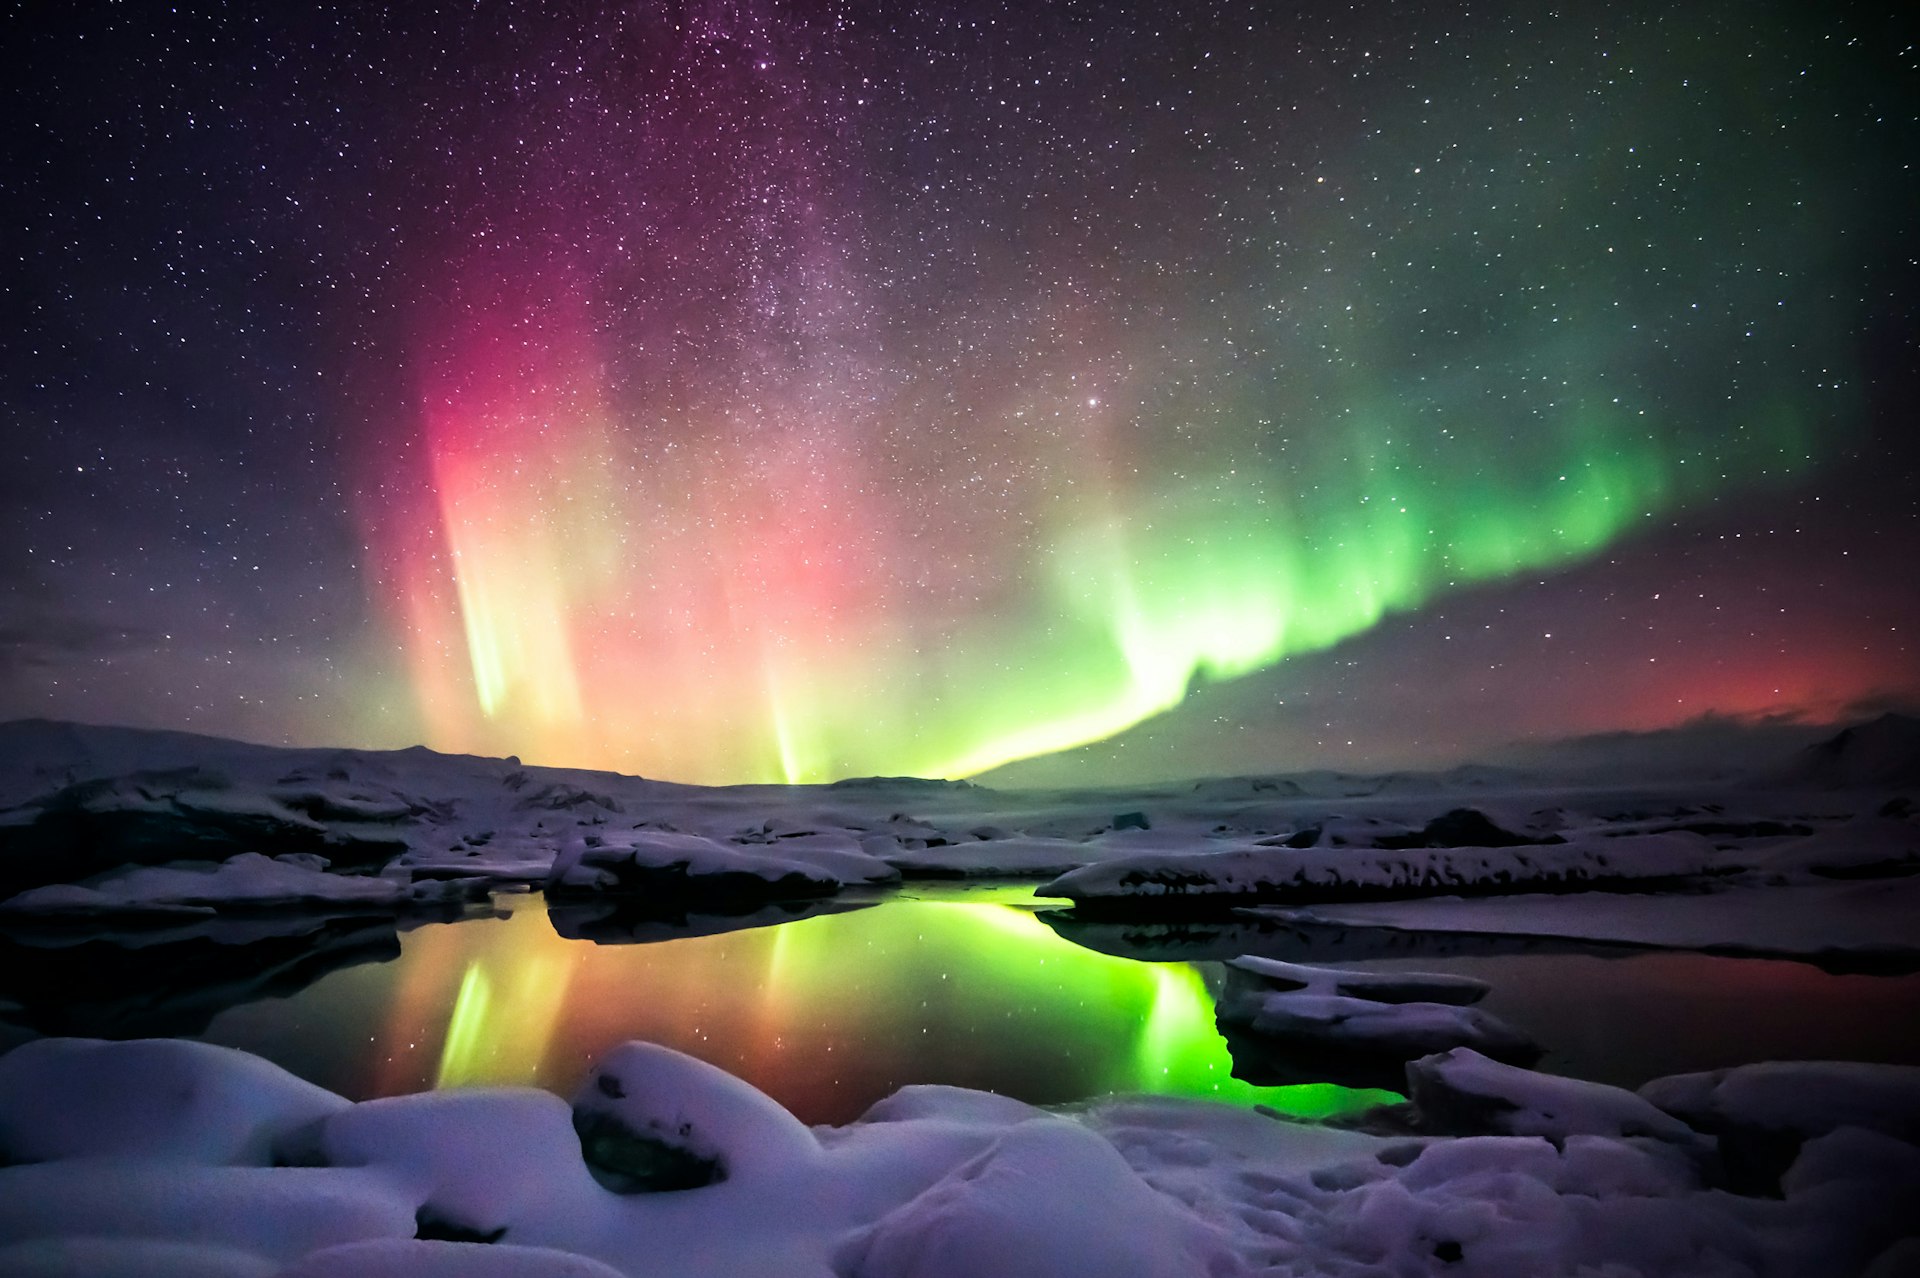 A green and red aurora over the Jokulsarlon lagoon in Iceland